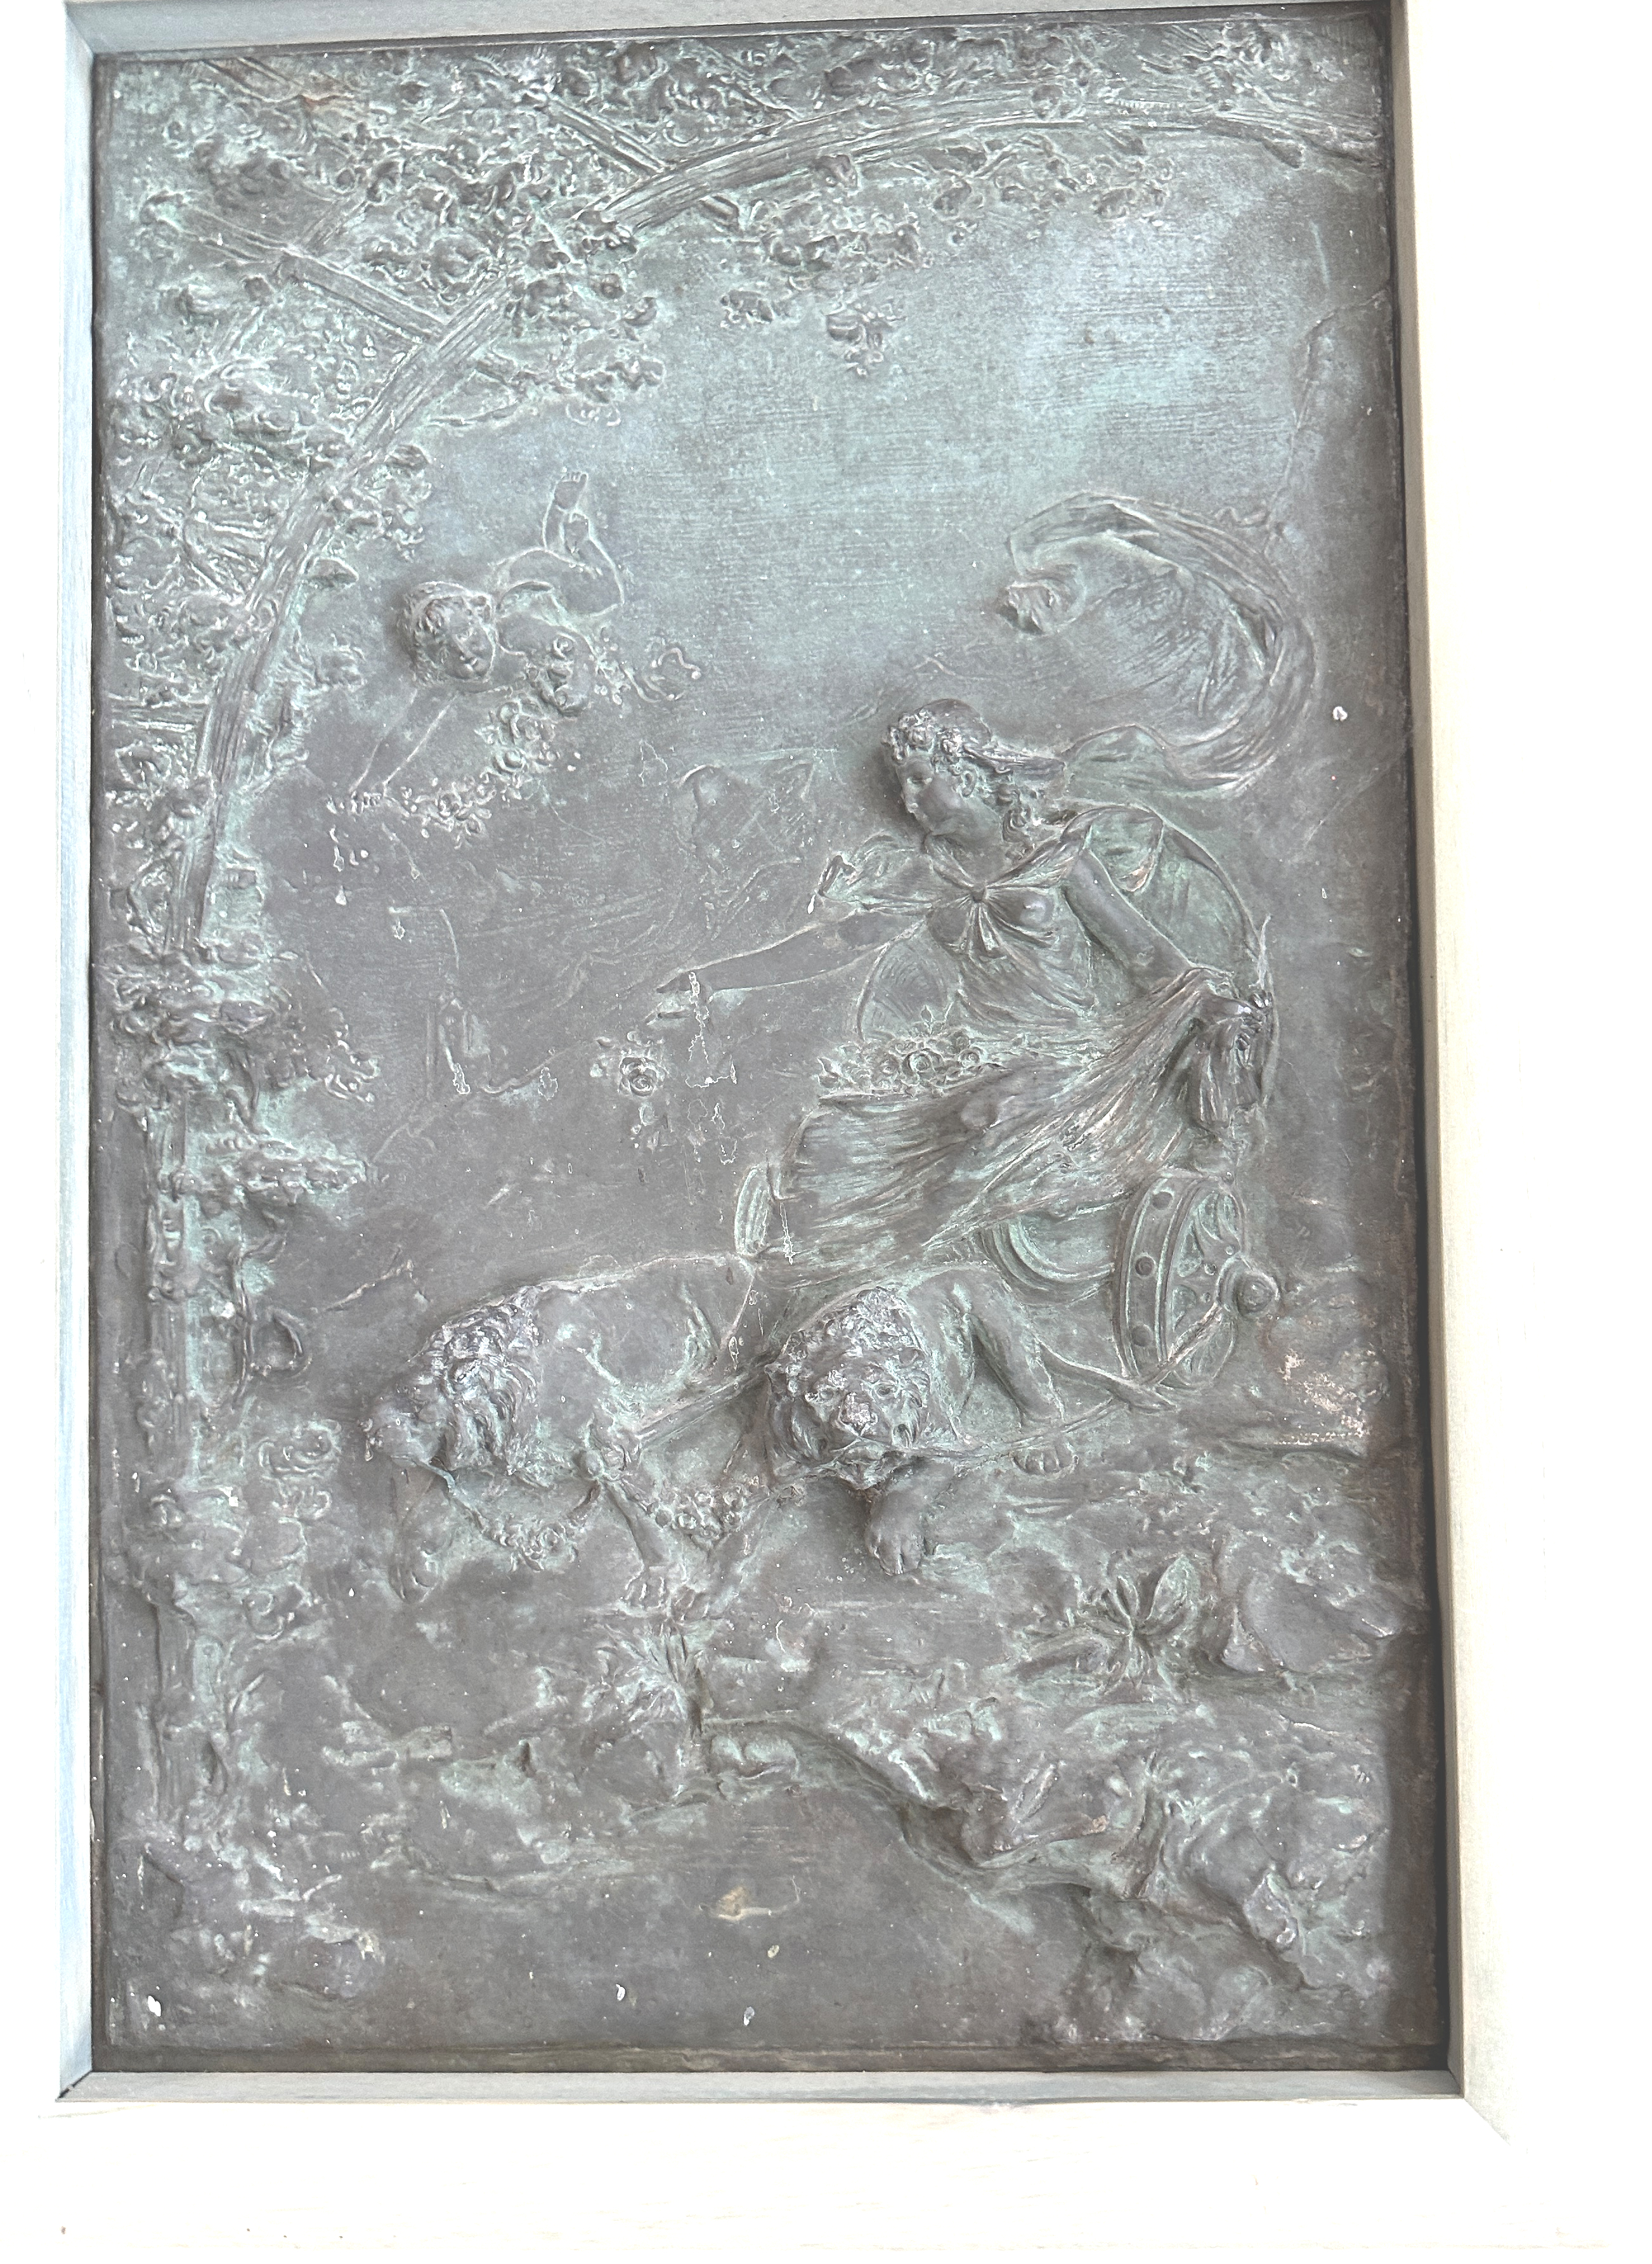 Duo of Antique Victorian Copper Repousse Angel Panels set in Modern Frames - 50cm x 32.5cm. - Image 2 of 8